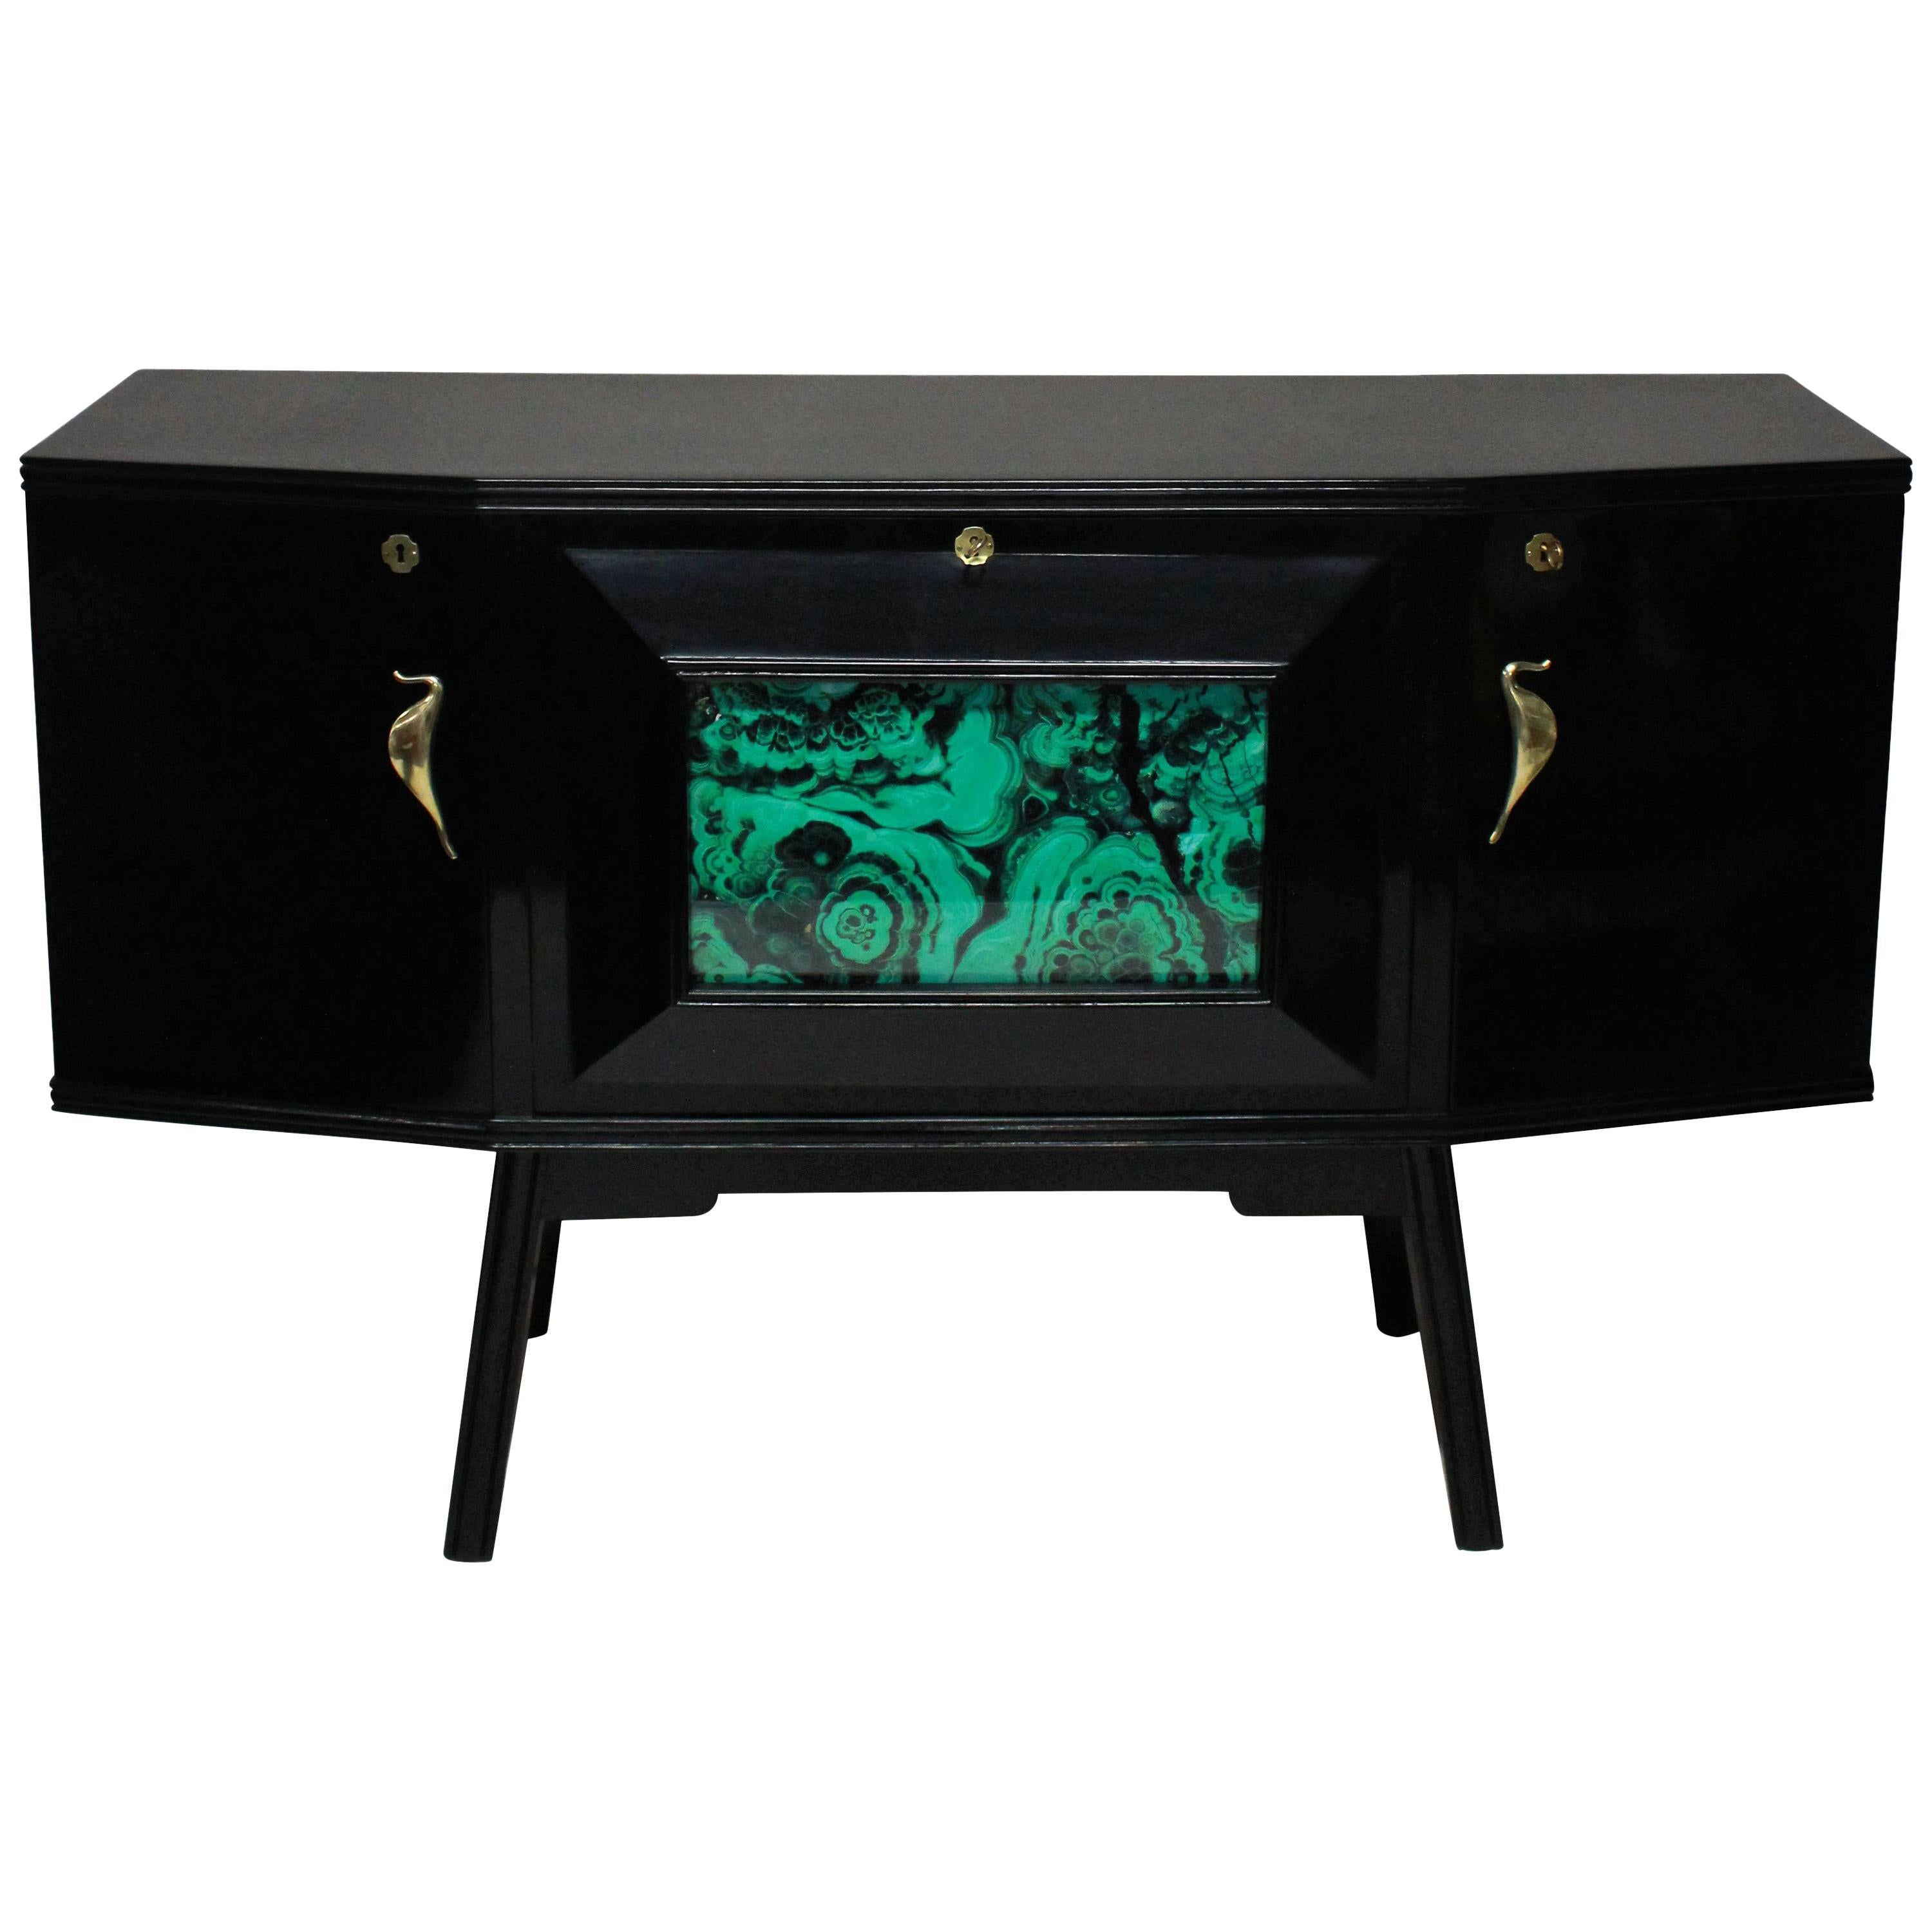 Lacquered Italian bar credenza stylish Italian bar credenza of interesting angular design in black lacquer with sepele wood interior, with brass hardware and a faux malachite central panel and mirrored interior.

 